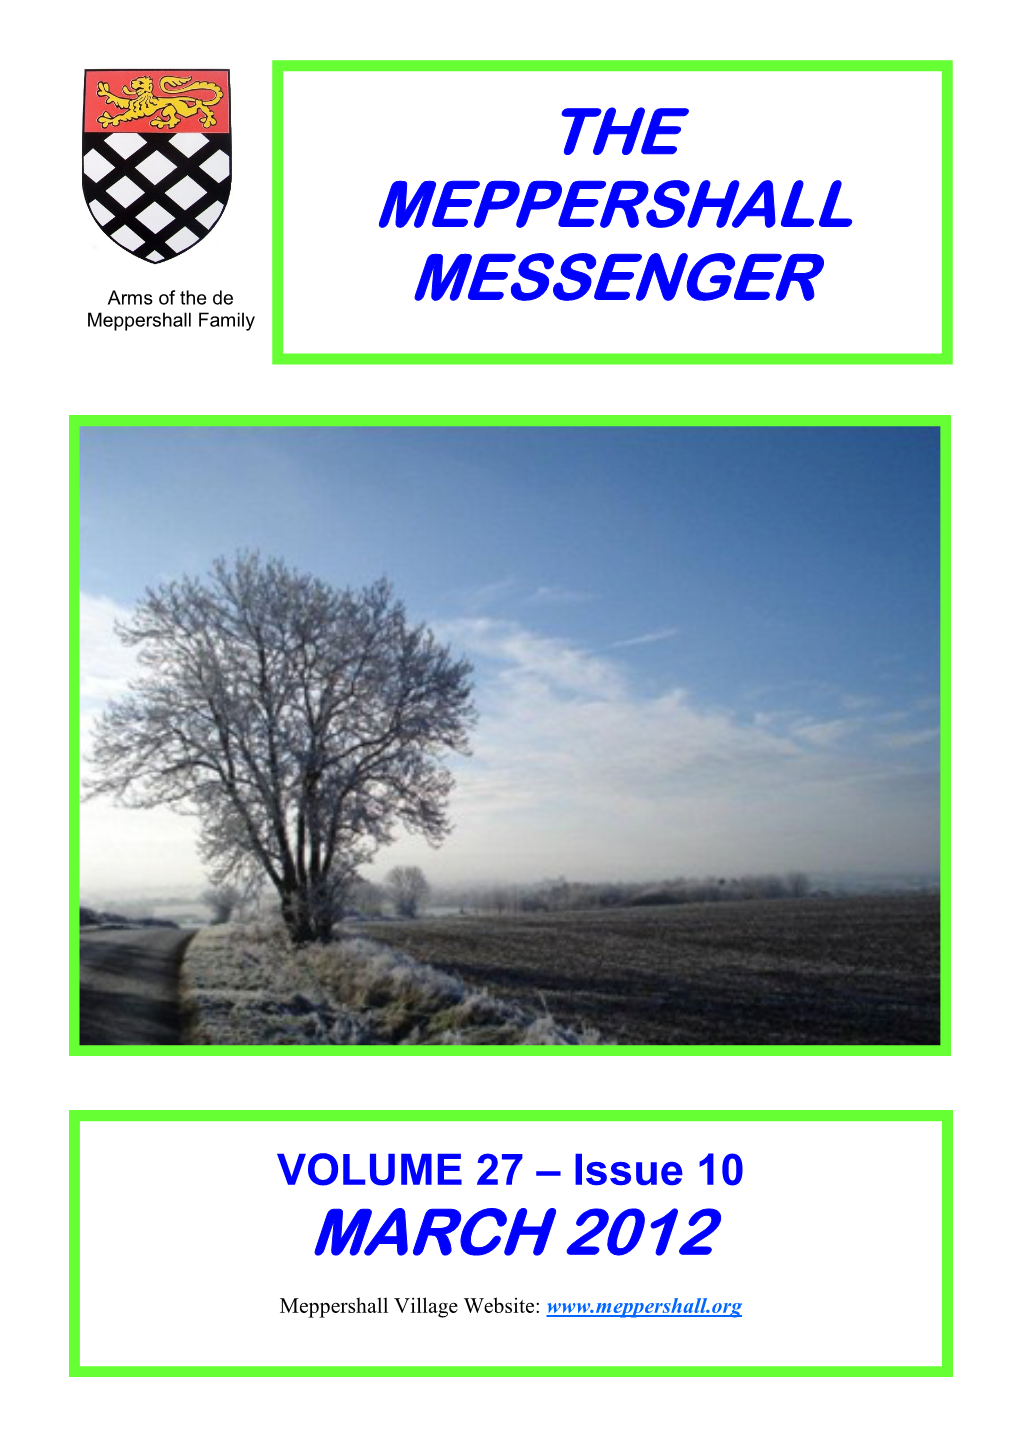 The Meppershall Messenger March 2012